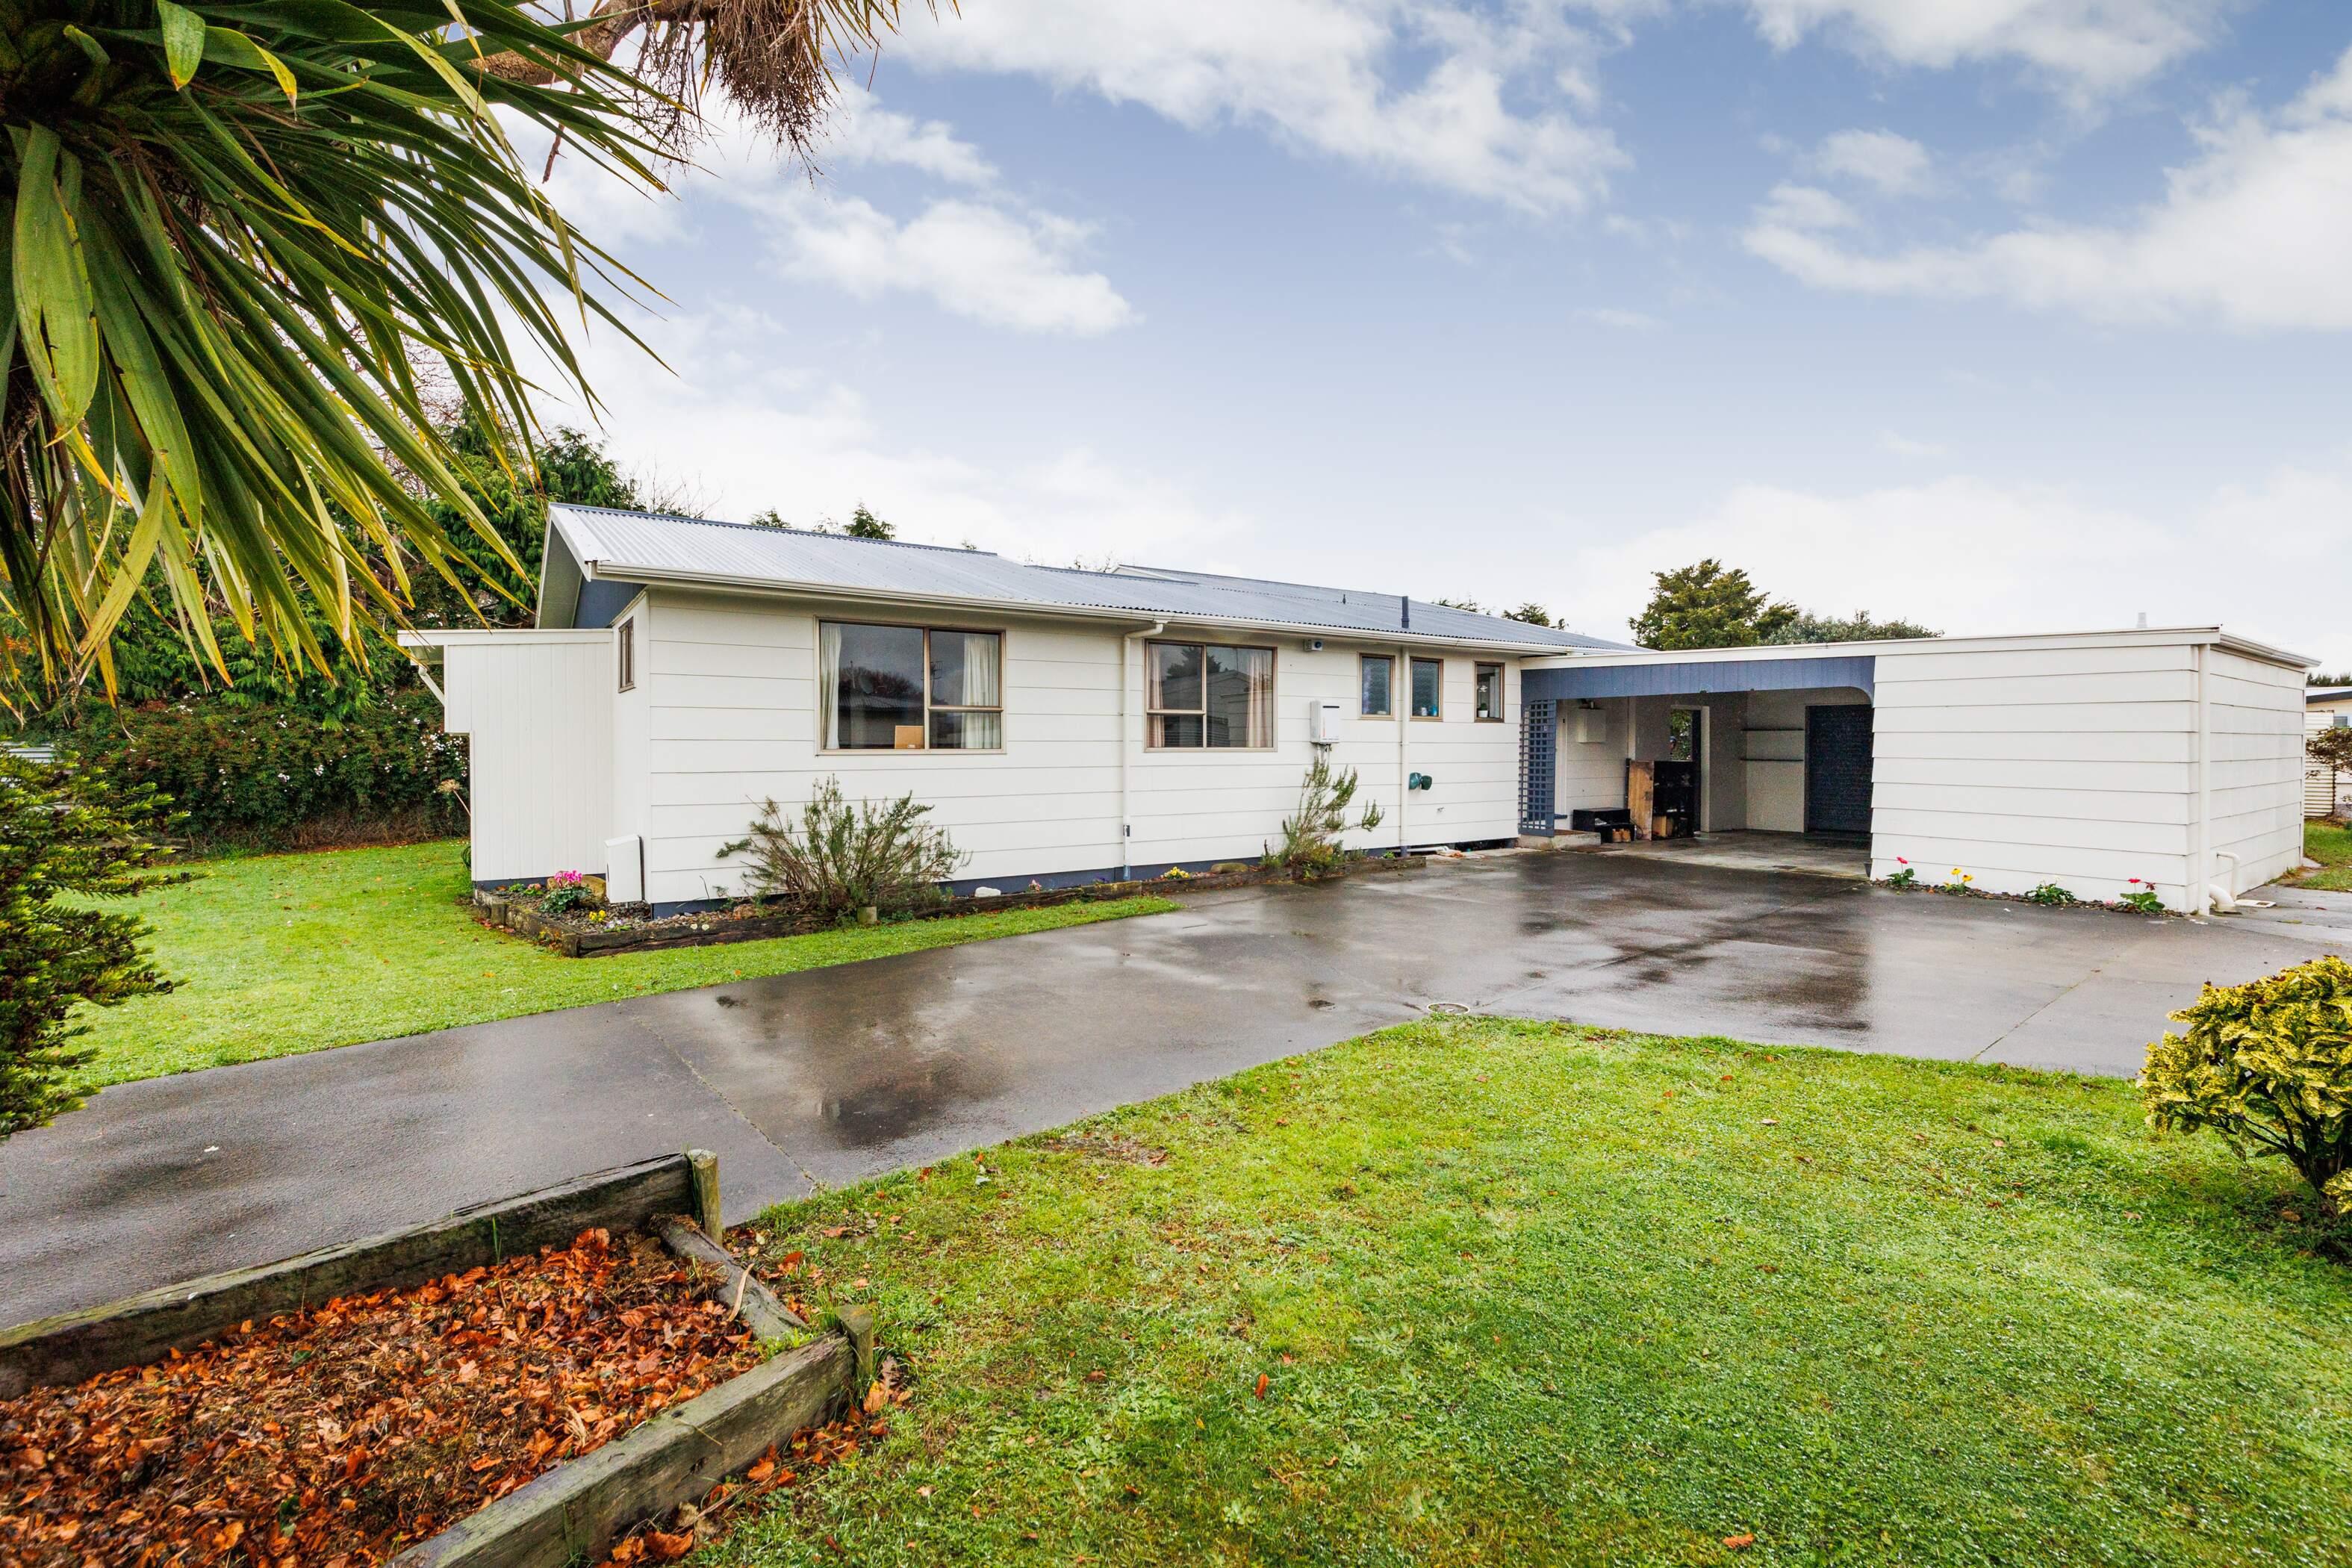 Property Picture: Let's Move to Friendly Feilding